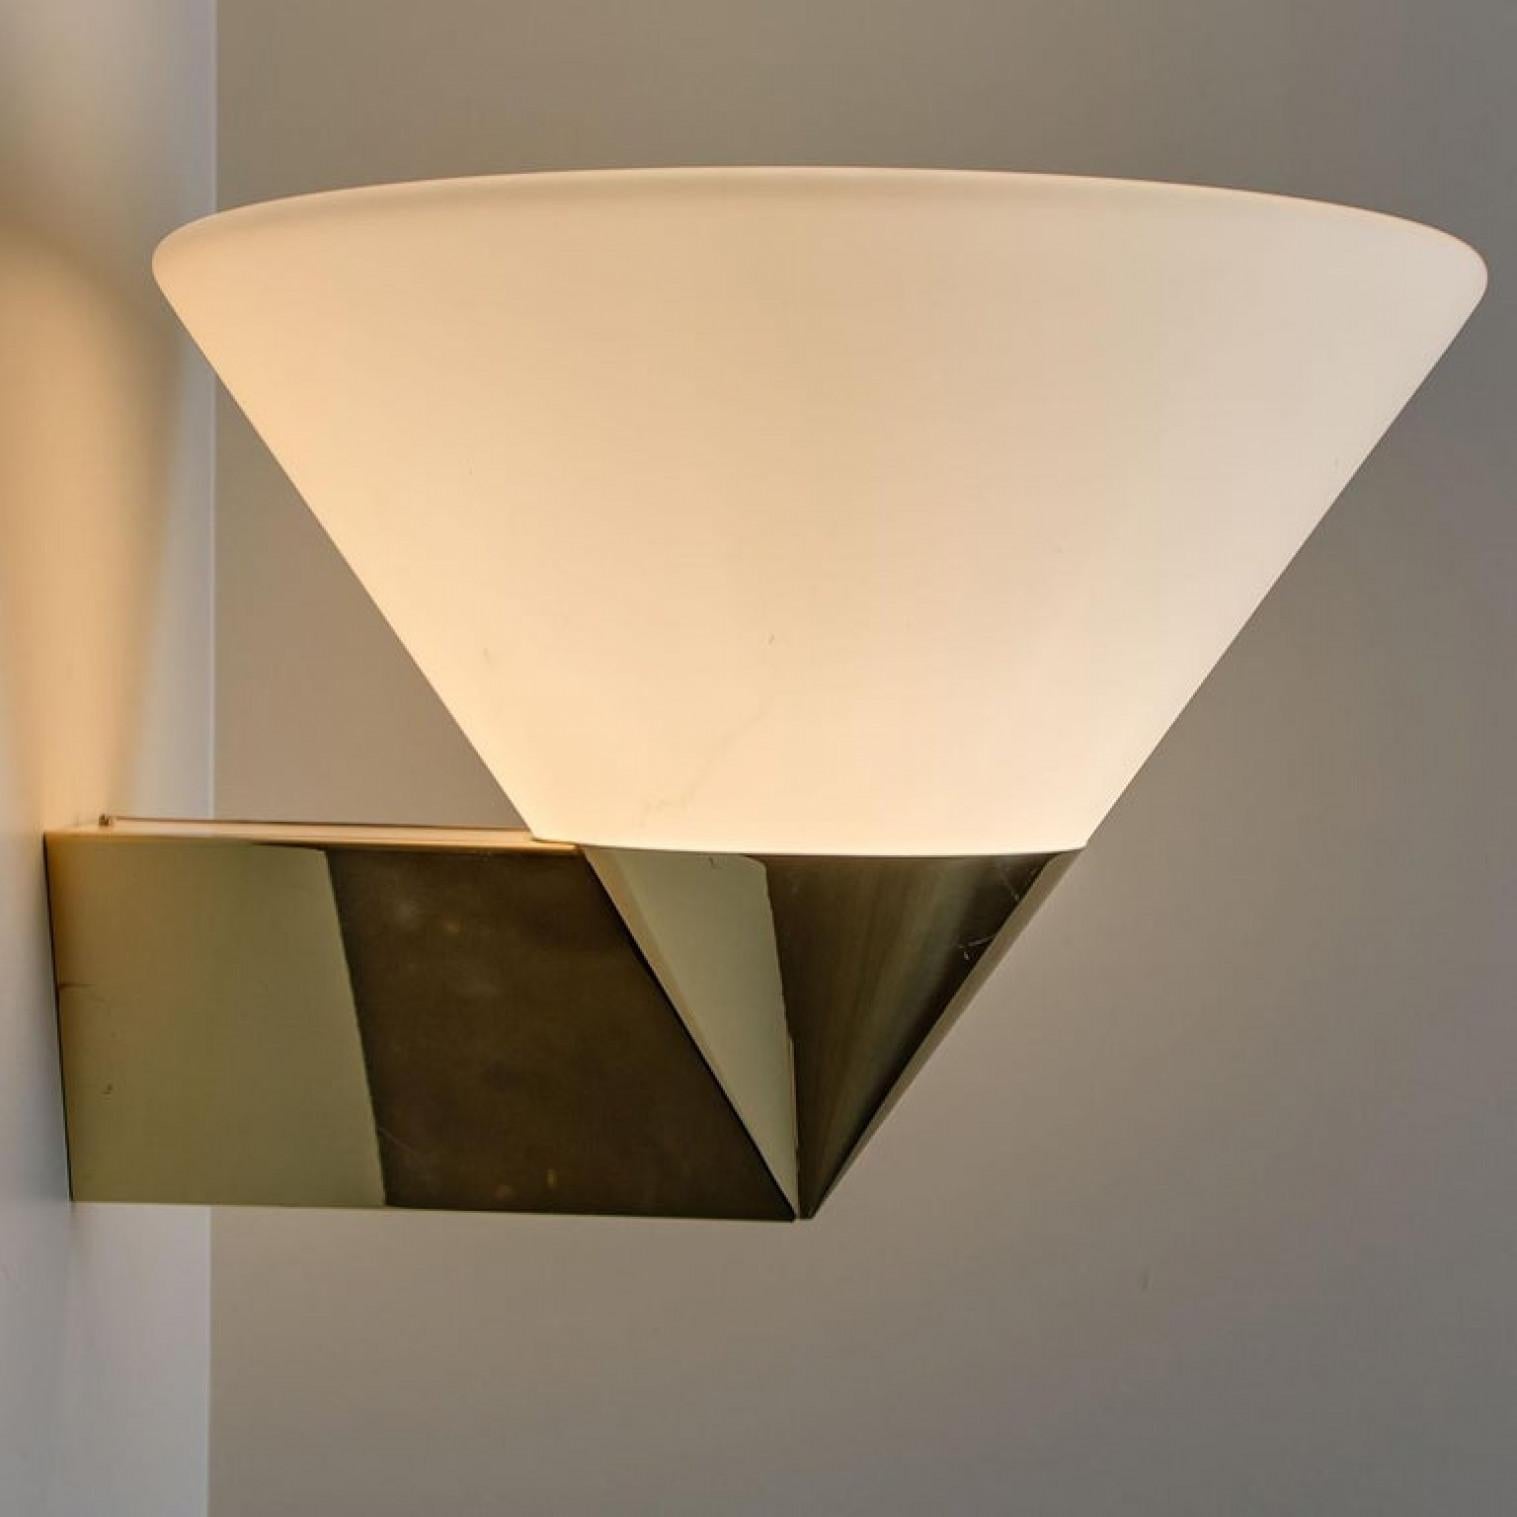 1 of the 4 Modern Wall Lamps by Glashütte Limburg, 1970 In Good Condition For Sale In Rijssen, NL